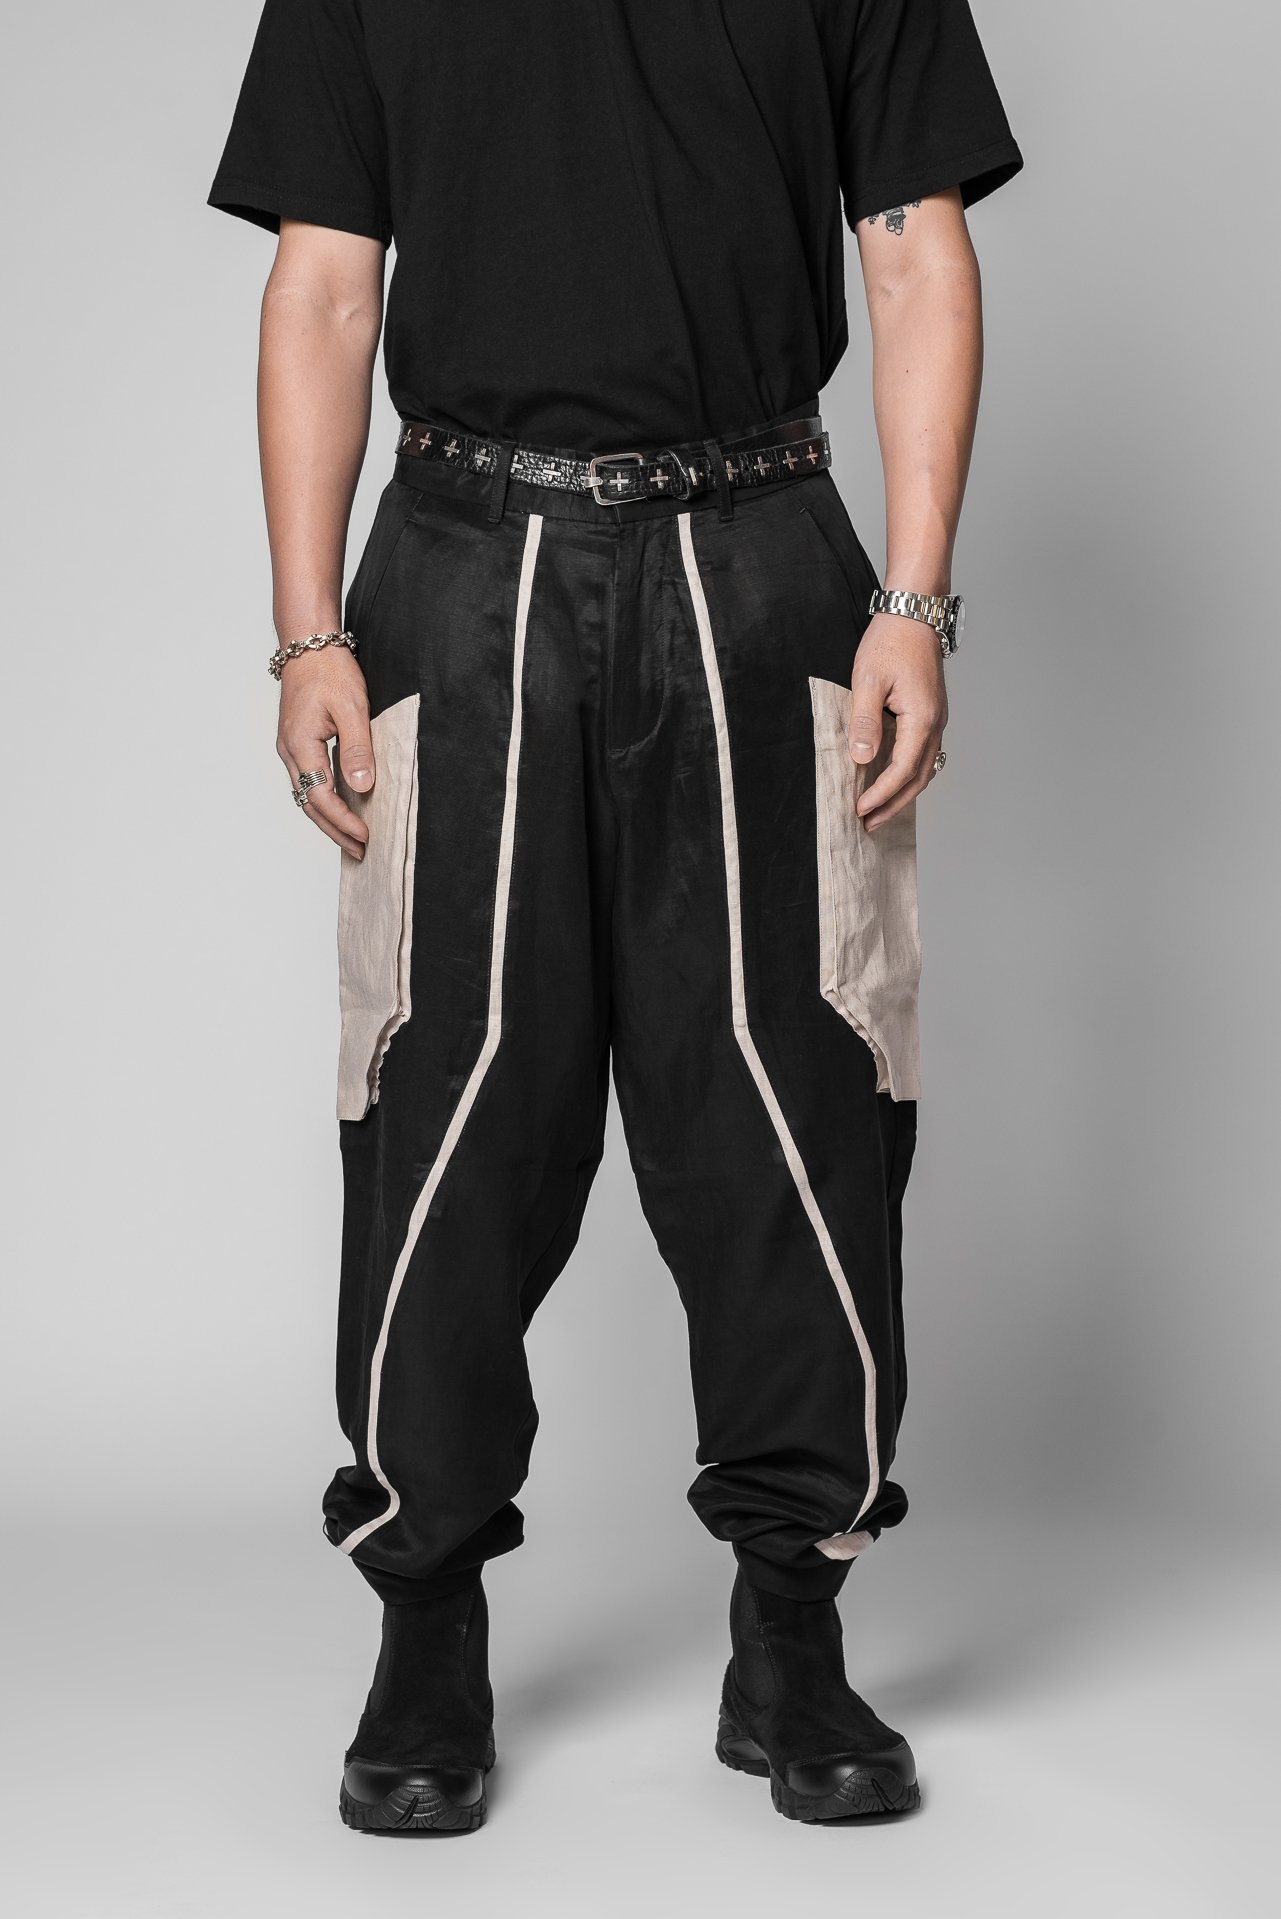 Product shot of a model wearing the black and sand Autograft Cargo Pants